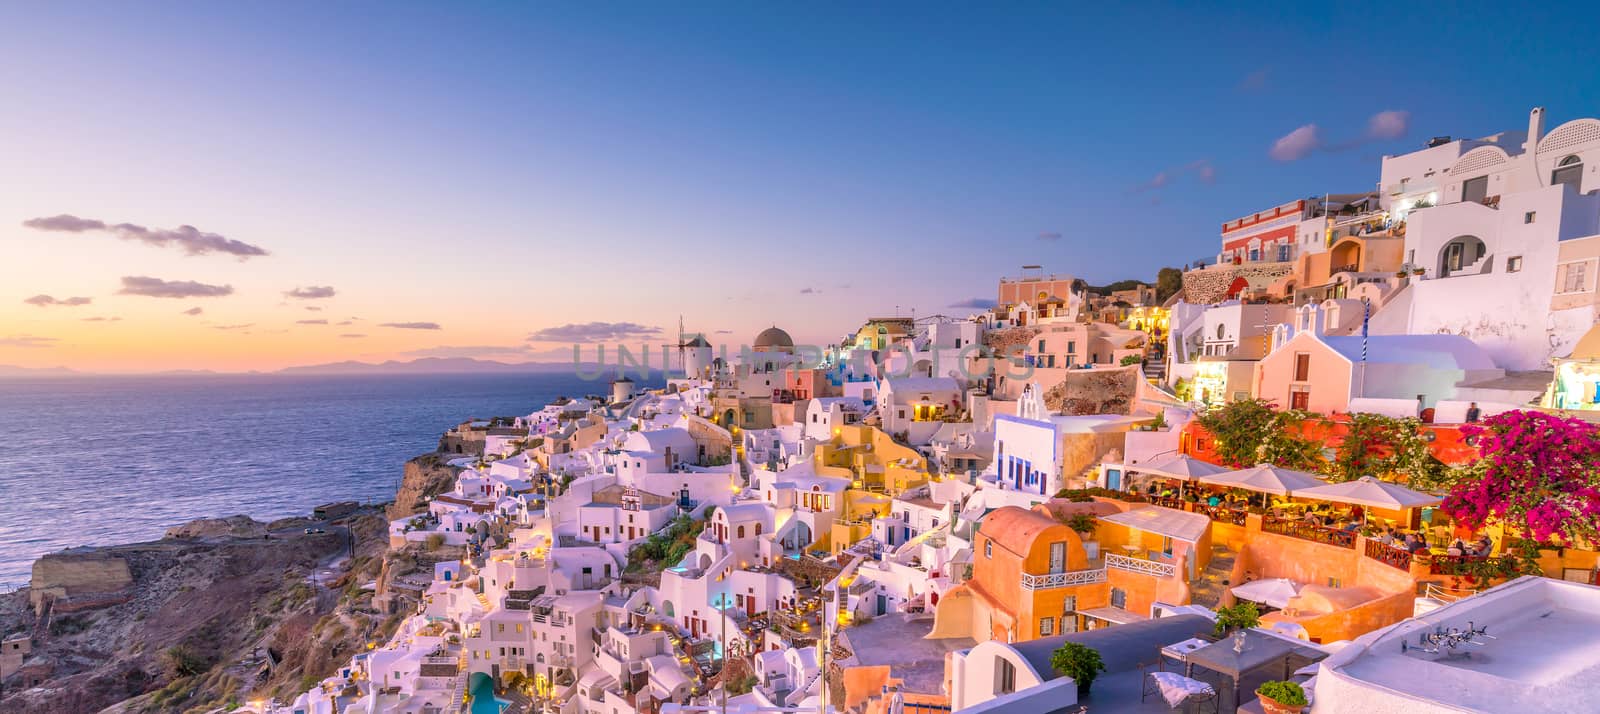 Sunset on the famous Oia city, Greece, Europe by f11photo